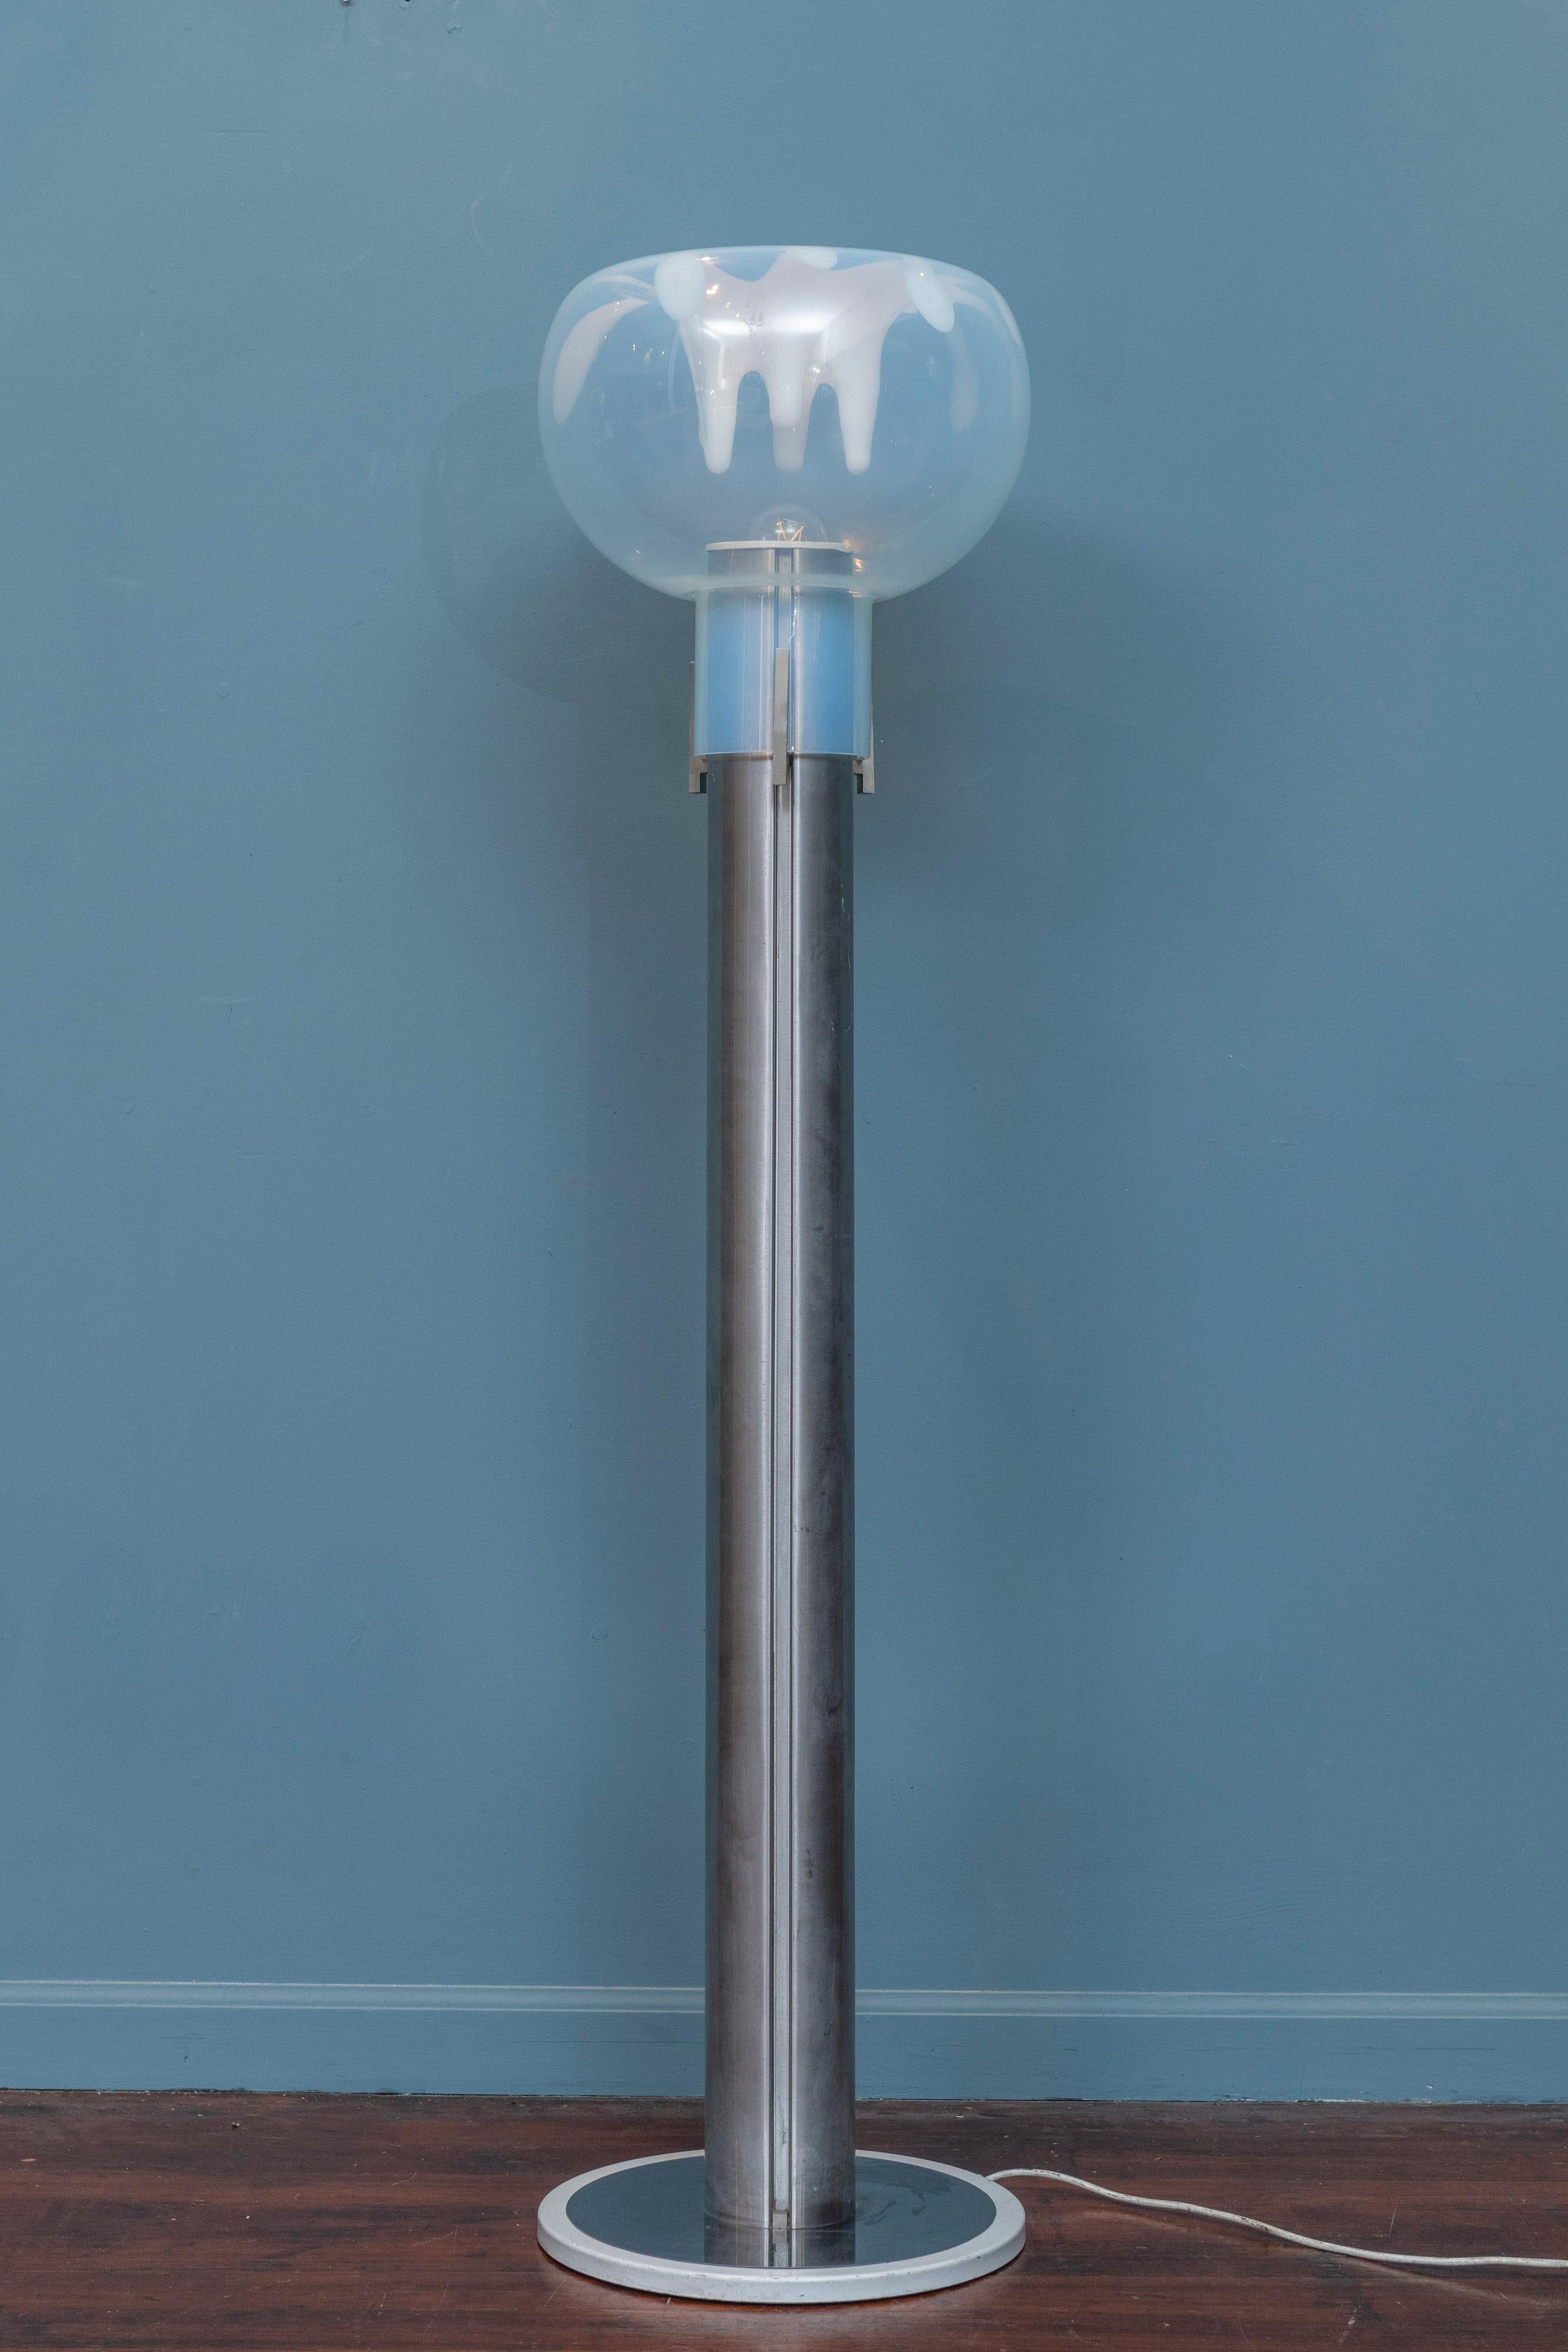 Tony Zuccheri design blown glass and stainless steel floor lamp for Veart, Italy. Emitting a pale blue and white color when illuminated with a thick glass hand blown shade on a stainless steel and white lacquer base. Lamp works as it should with